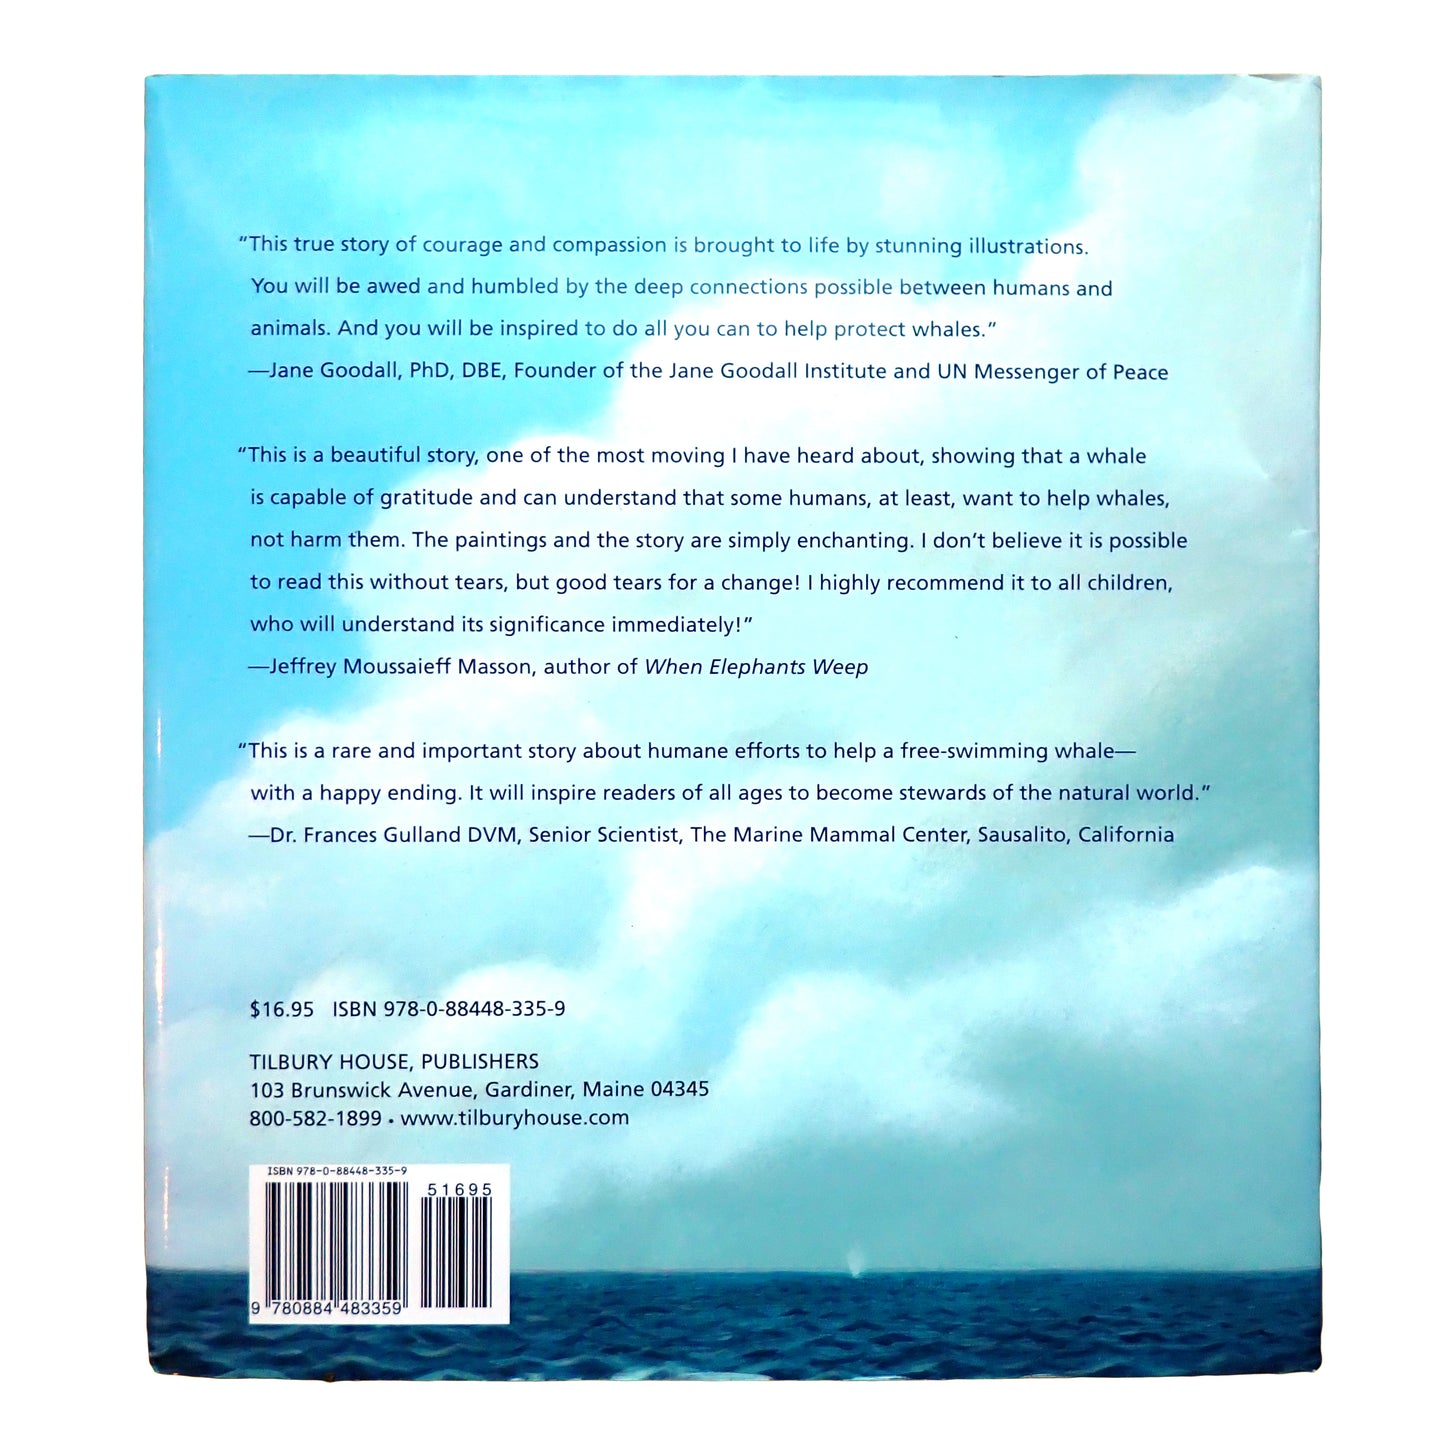 The Eye of the Whale: A Rescue Story - Jennifer O'Connell